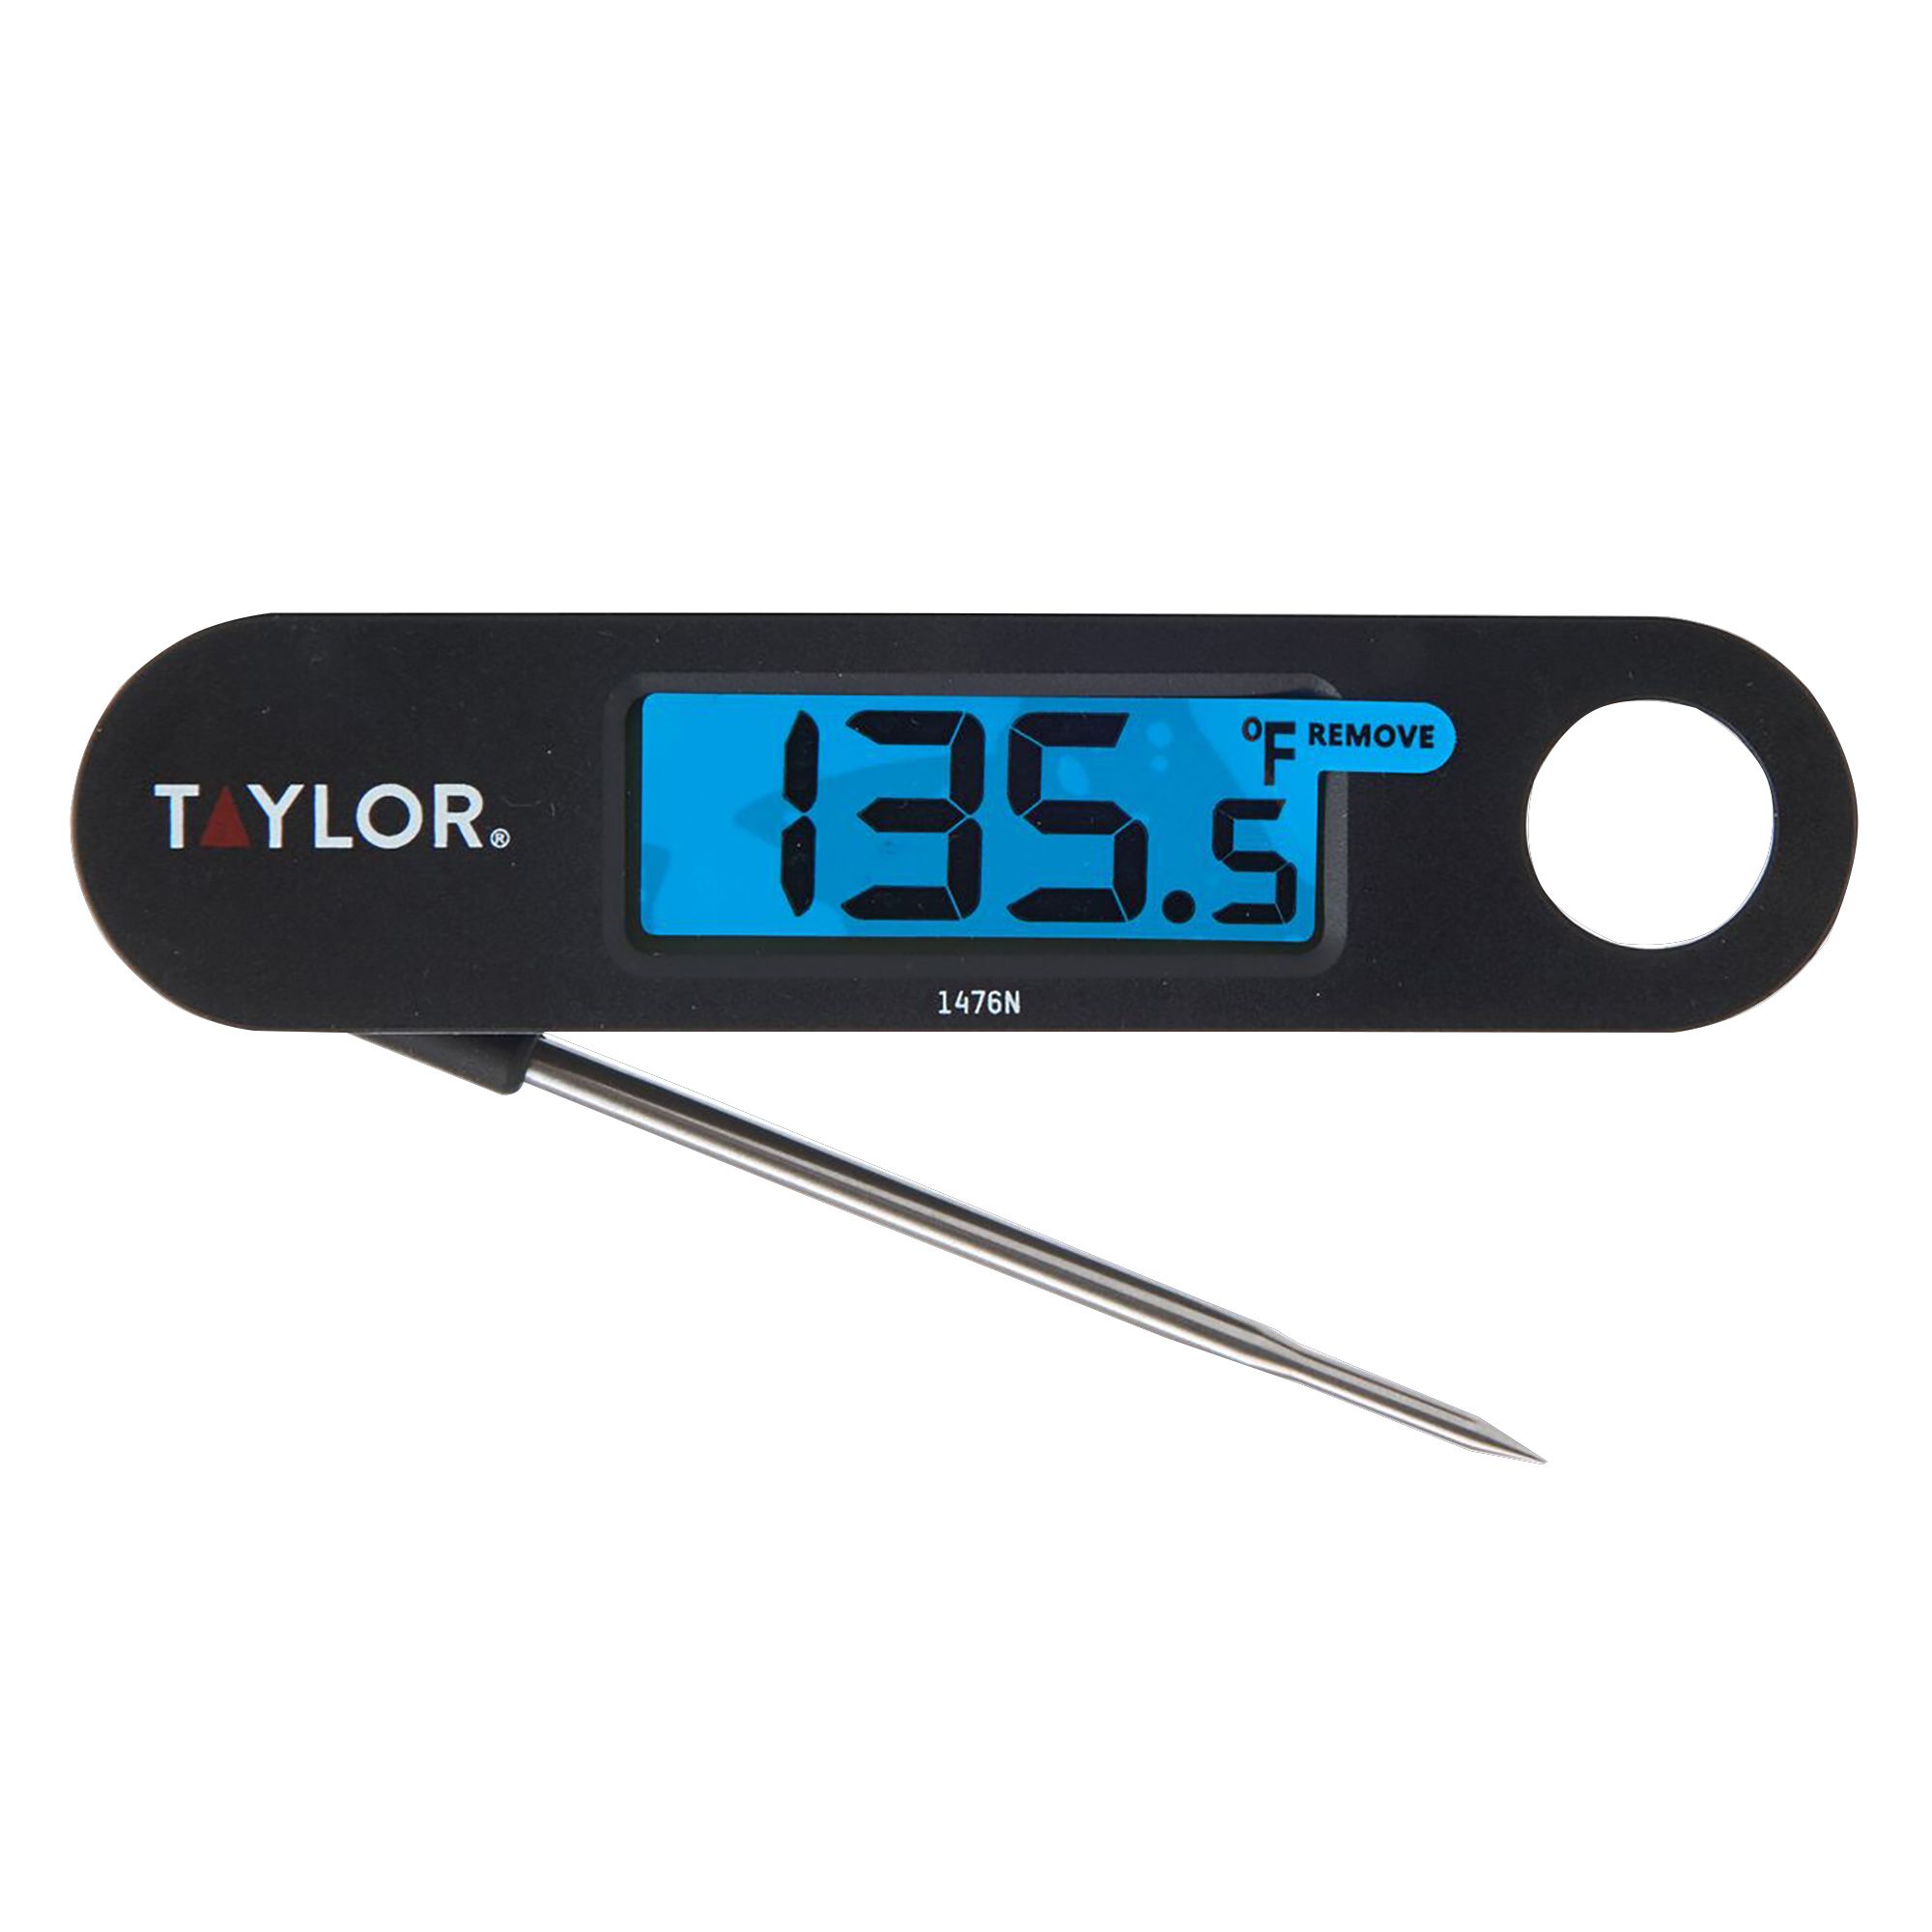 Taylor Digital Probe Thermometer  Hy-Vee Aisles Online Grocery